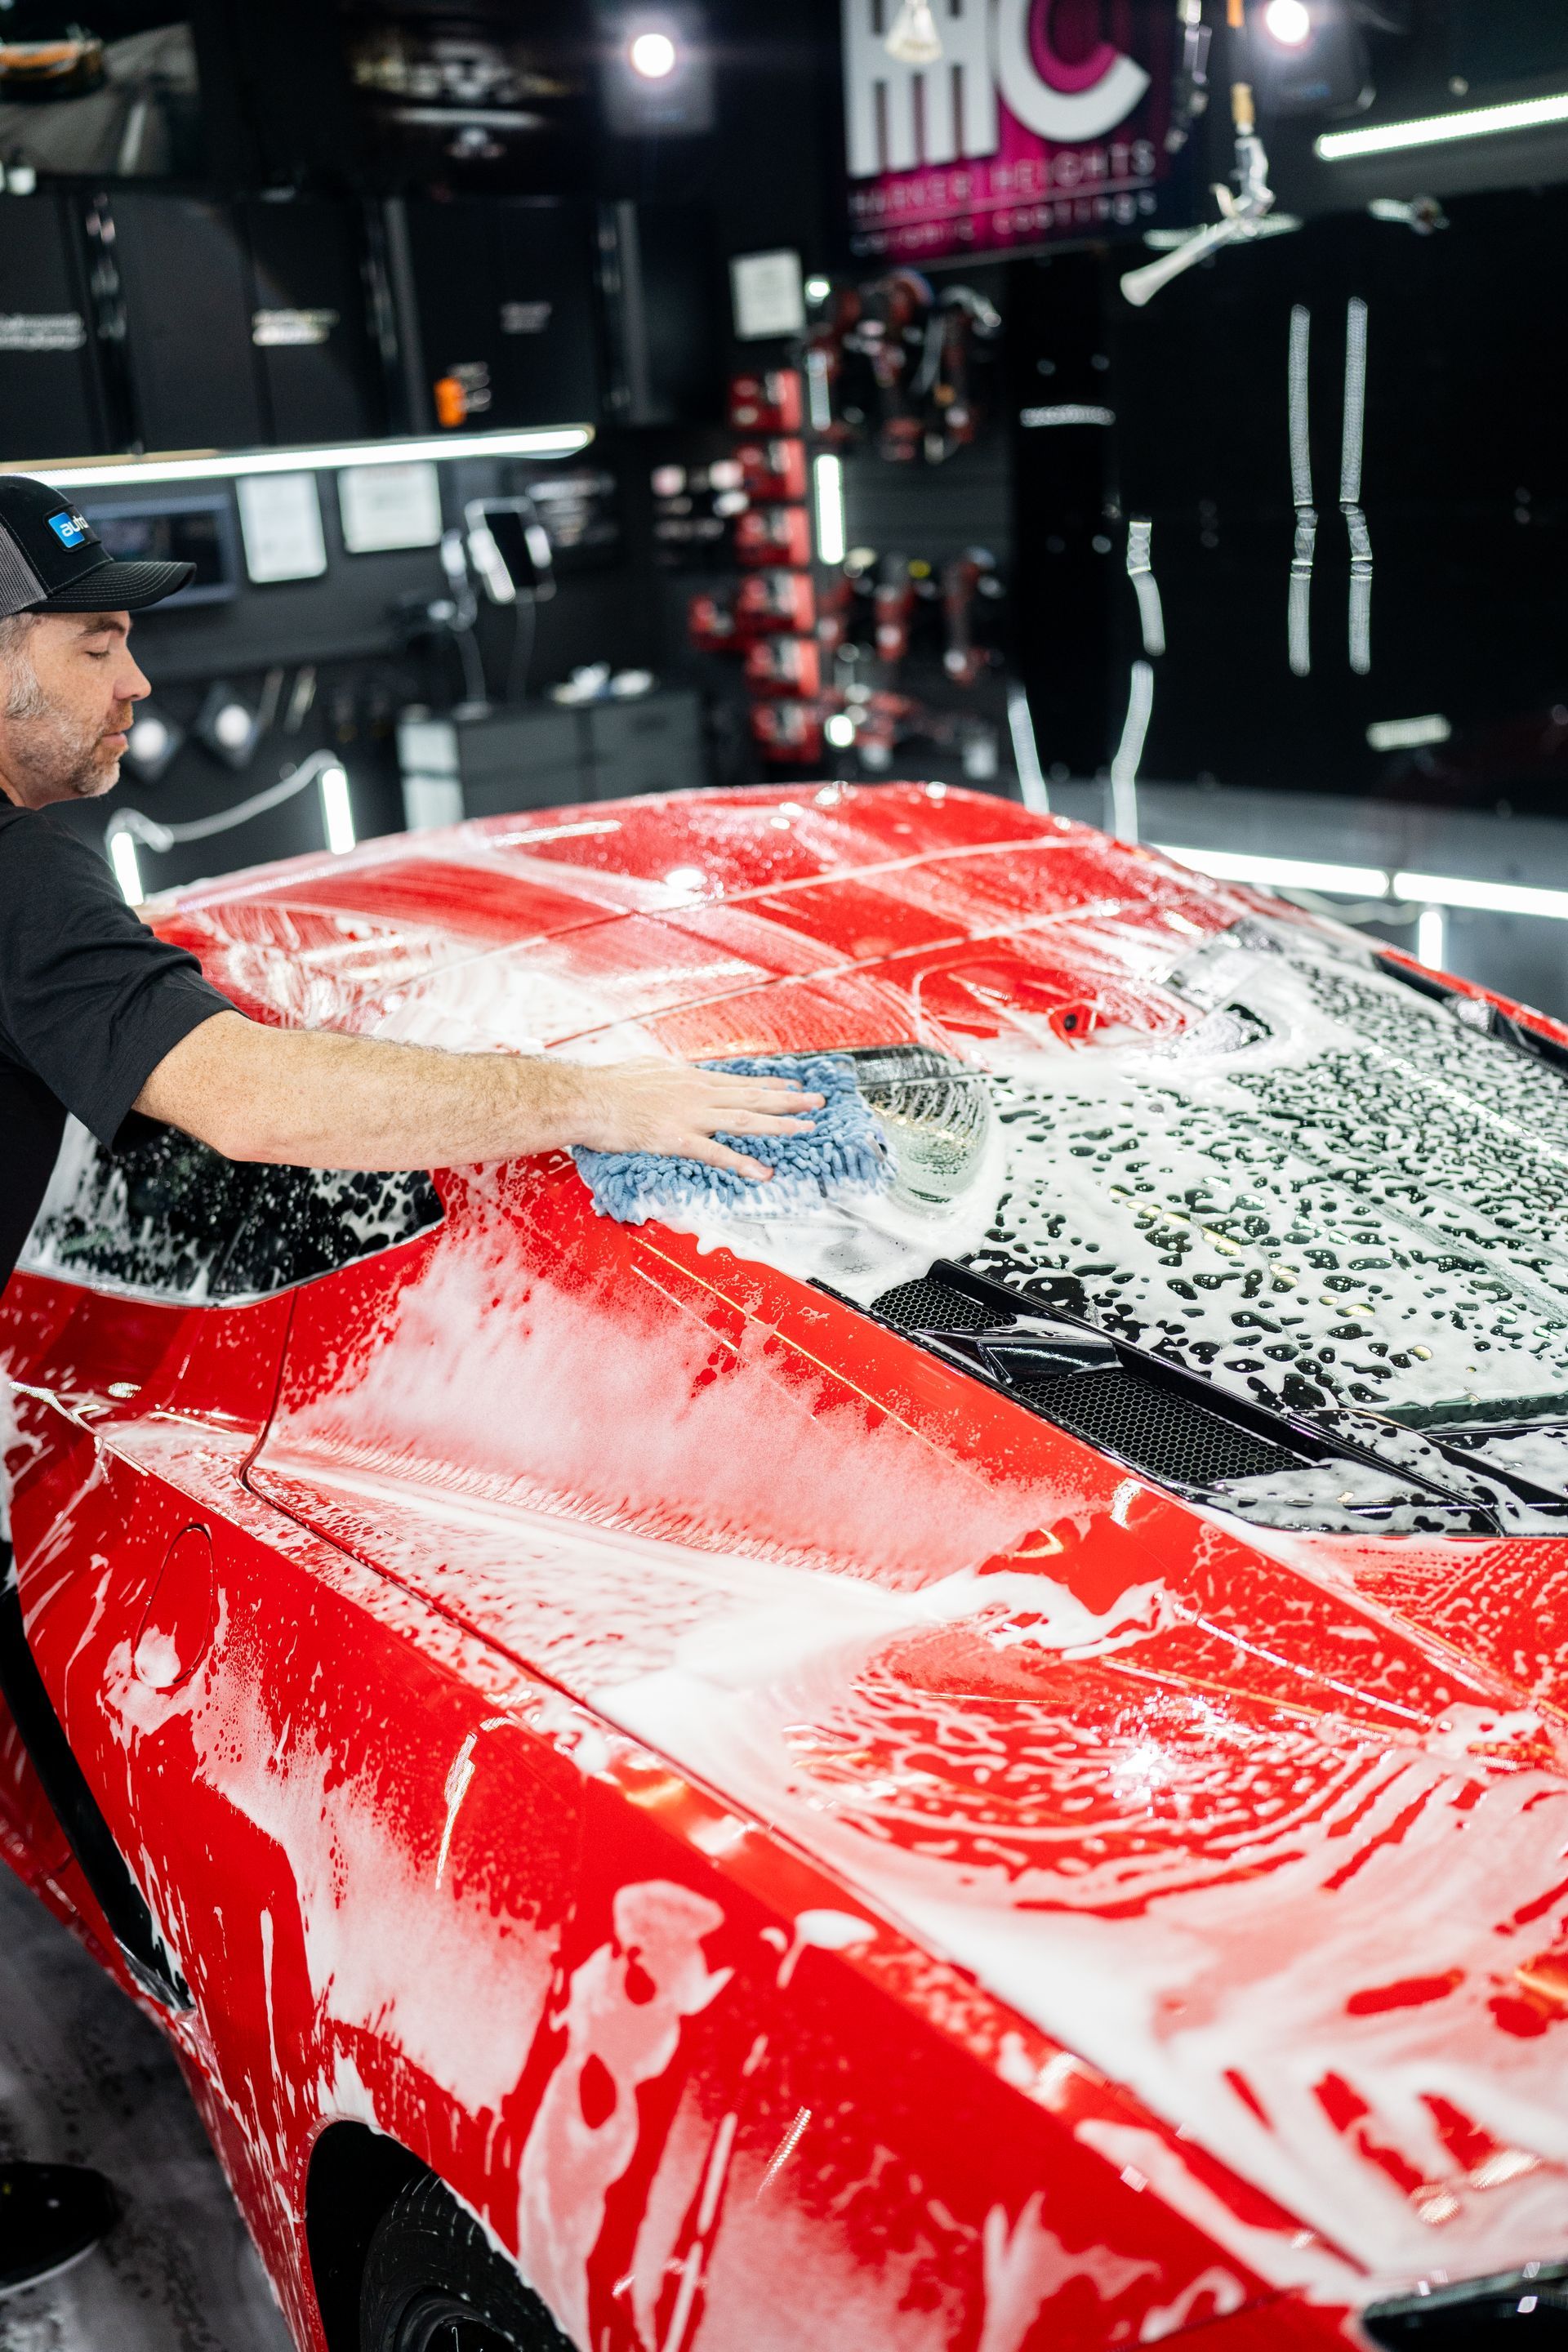 A man is washing a red sports car with soap and water.